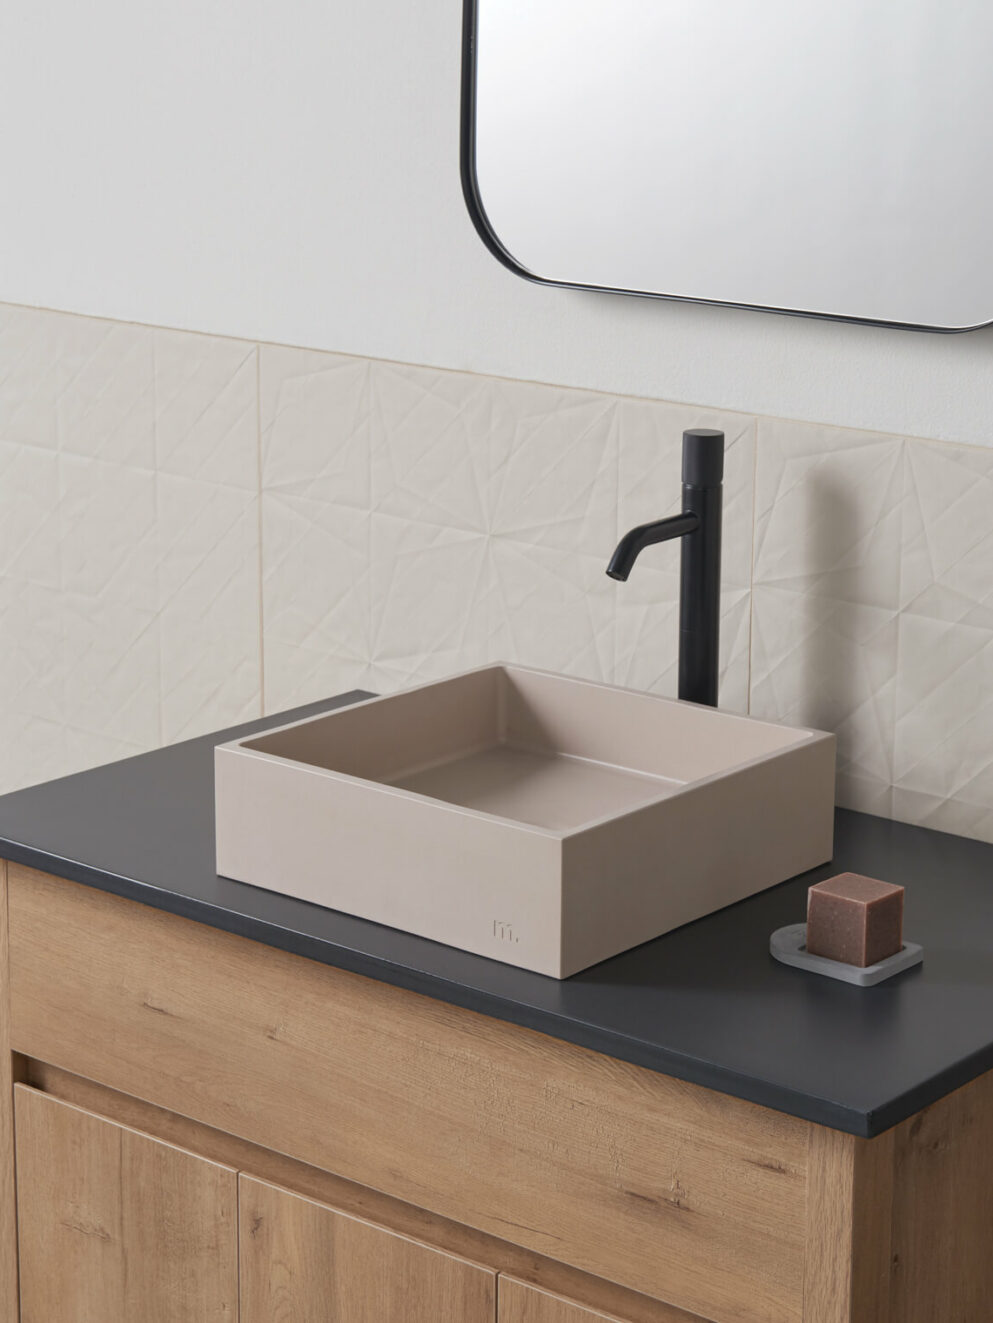 mudd concrete Yarra sm in the colour mocha in a modern light bathroom setting with black hardware